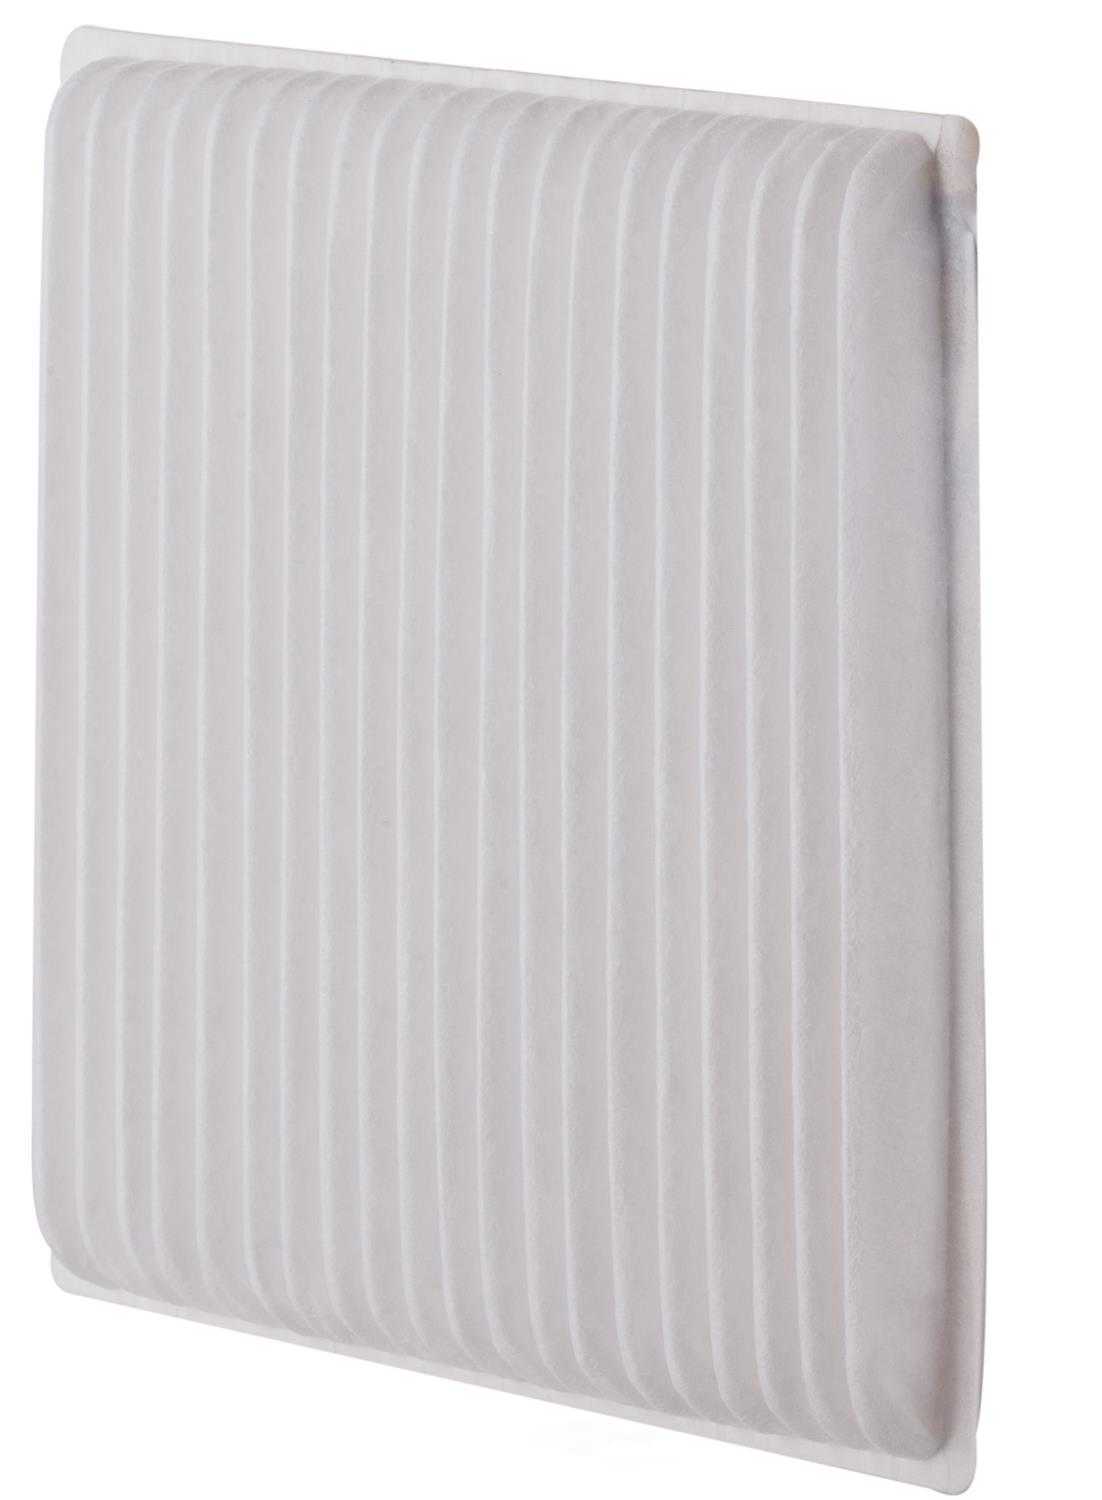 PRONTO/ID USA - Cabin Air Filter - PNP PC5516